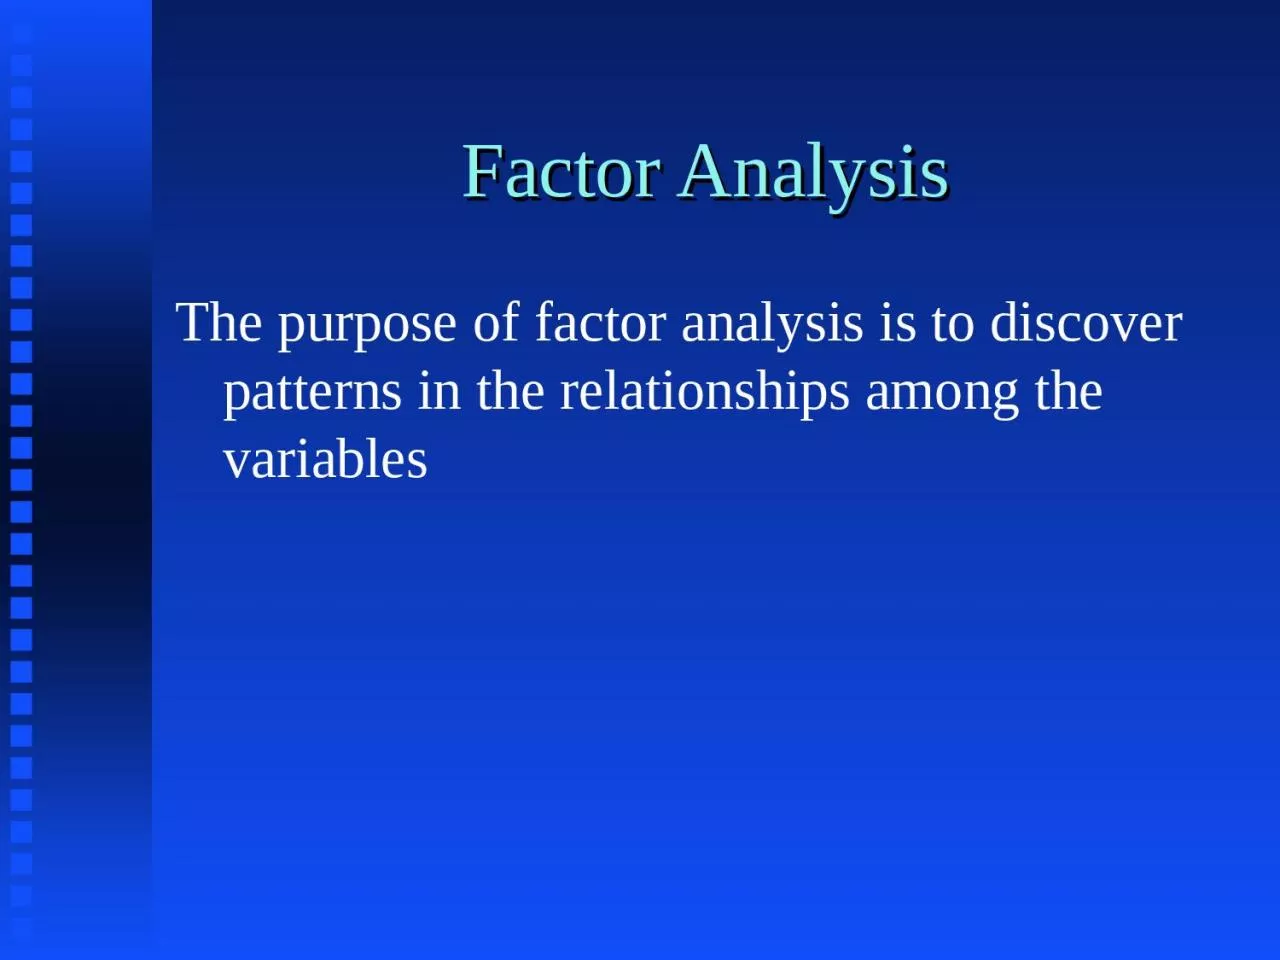 Factor Analysis The purpose of factor analysis is to discover patterns in the relationships